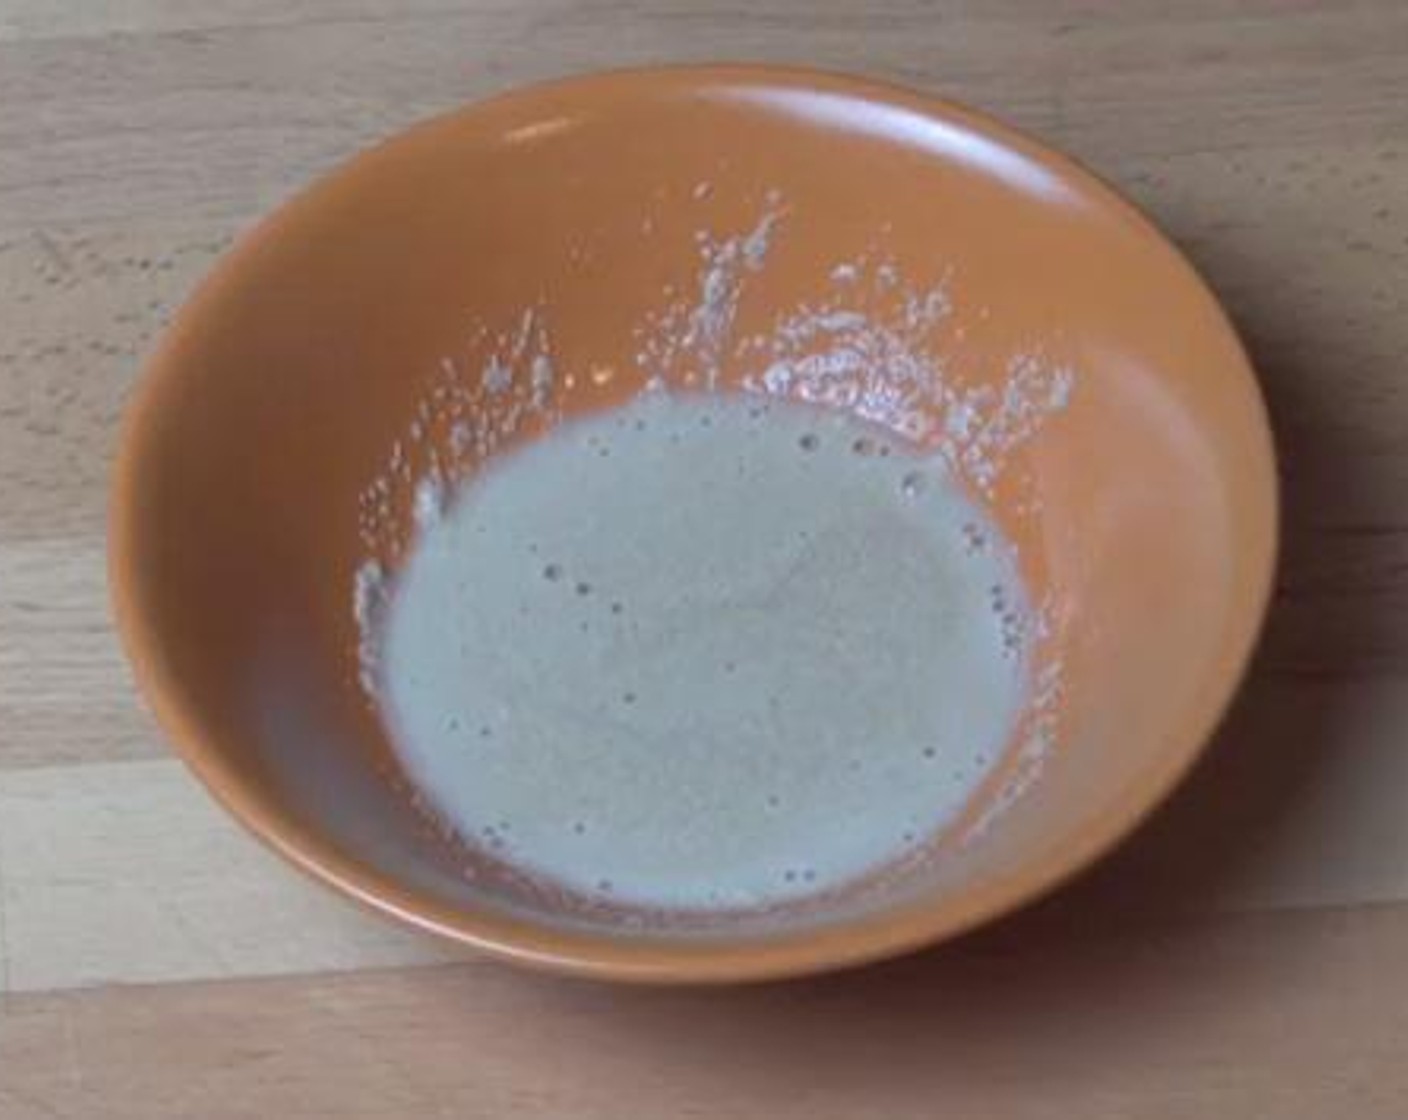 step 1 Into a small bowl, add the Granulated Sugar (1/2 tsp), Instant Dry Yeast (1/2 Tbsp), and Warm Water (2 Tbsp). Mix evenly and set aside for ten minutes.